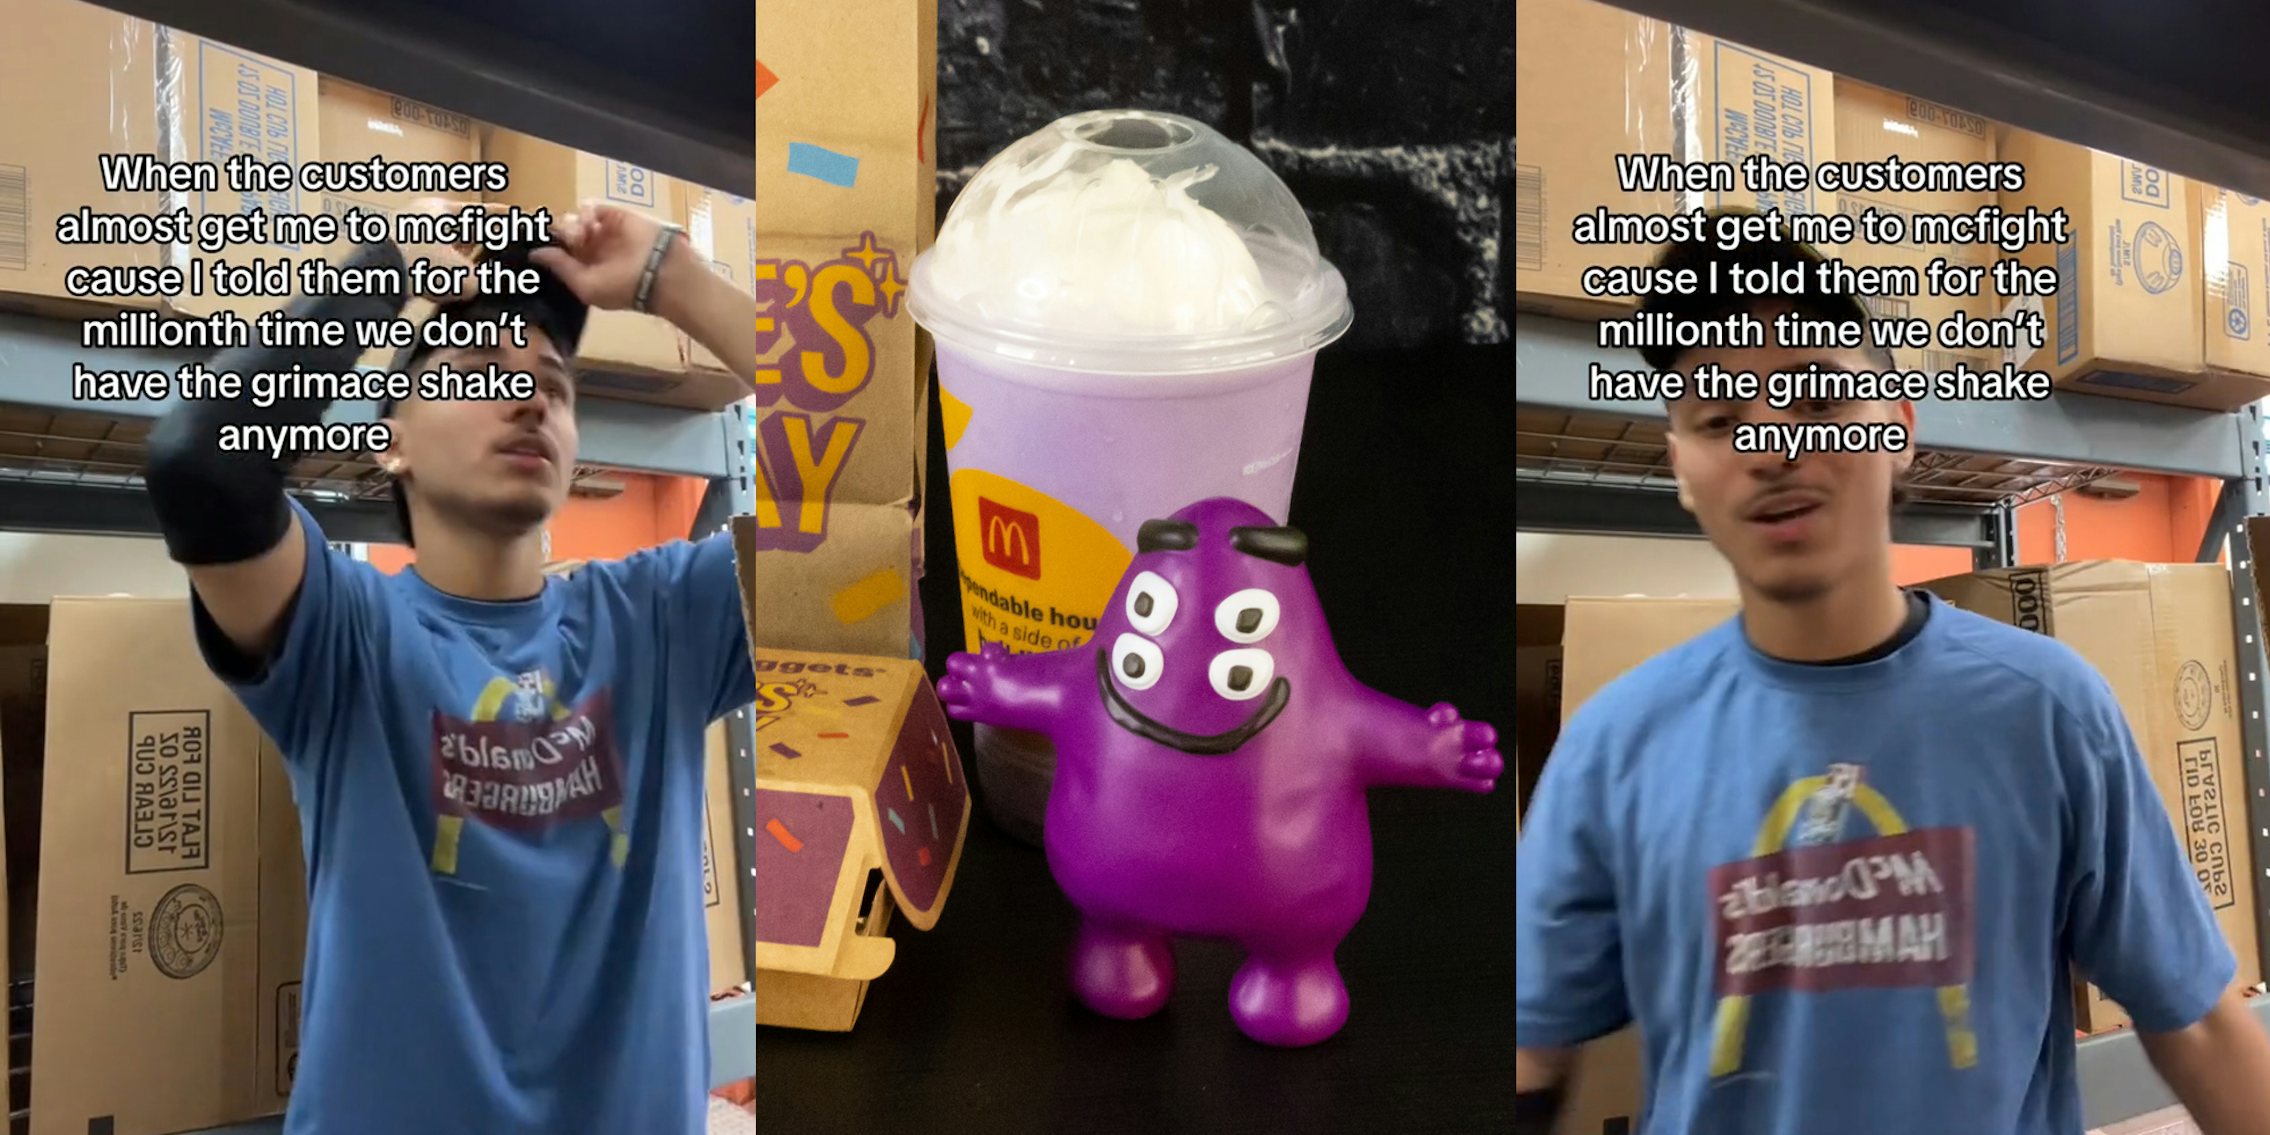 McDonald's employee with caption 'When the customers almost get me to mcfight cause I told them for the millionth time we don't have the grimace shake anymore' (l) Grimace shake with toy on black surface (c) McDonald's employee with caption 'When the customers almost get me to mcfight cause I told them for the millionth time we don't have the grimace shake anymore' (r)